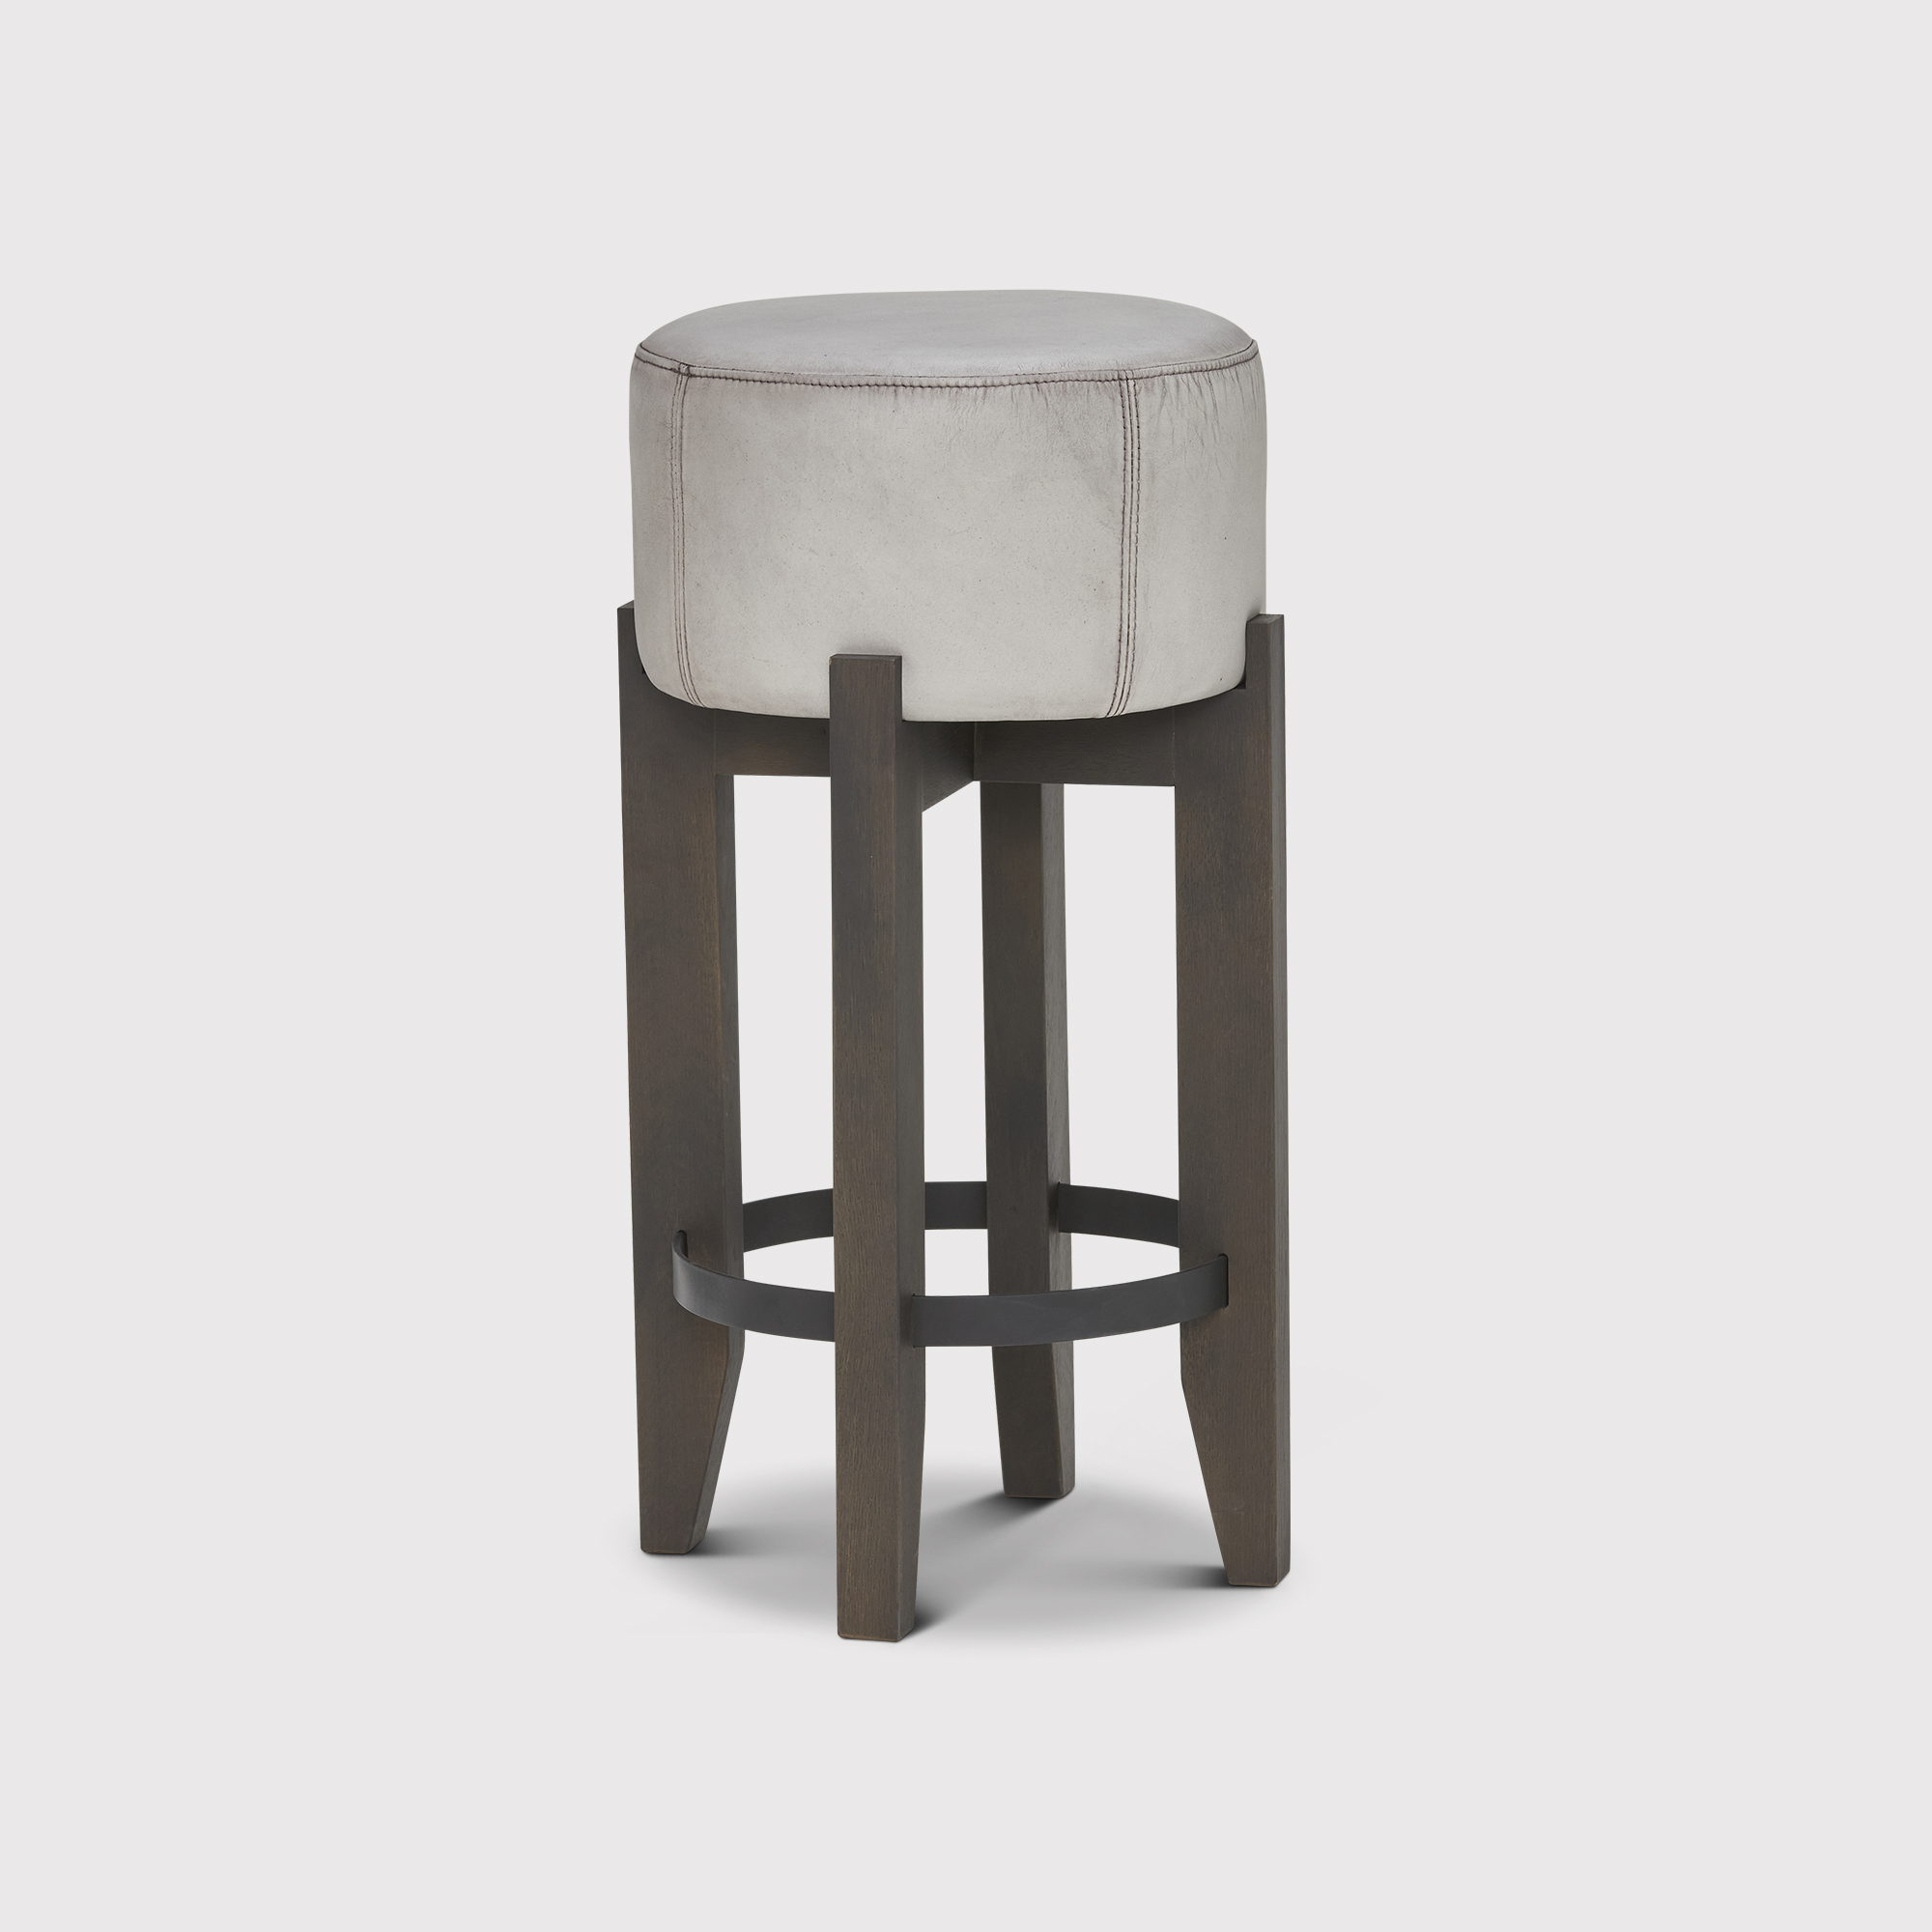 Pure Furniture Pomona Barstool 75cm With Wooden Legs, Neutral | Barker & Stonehouse